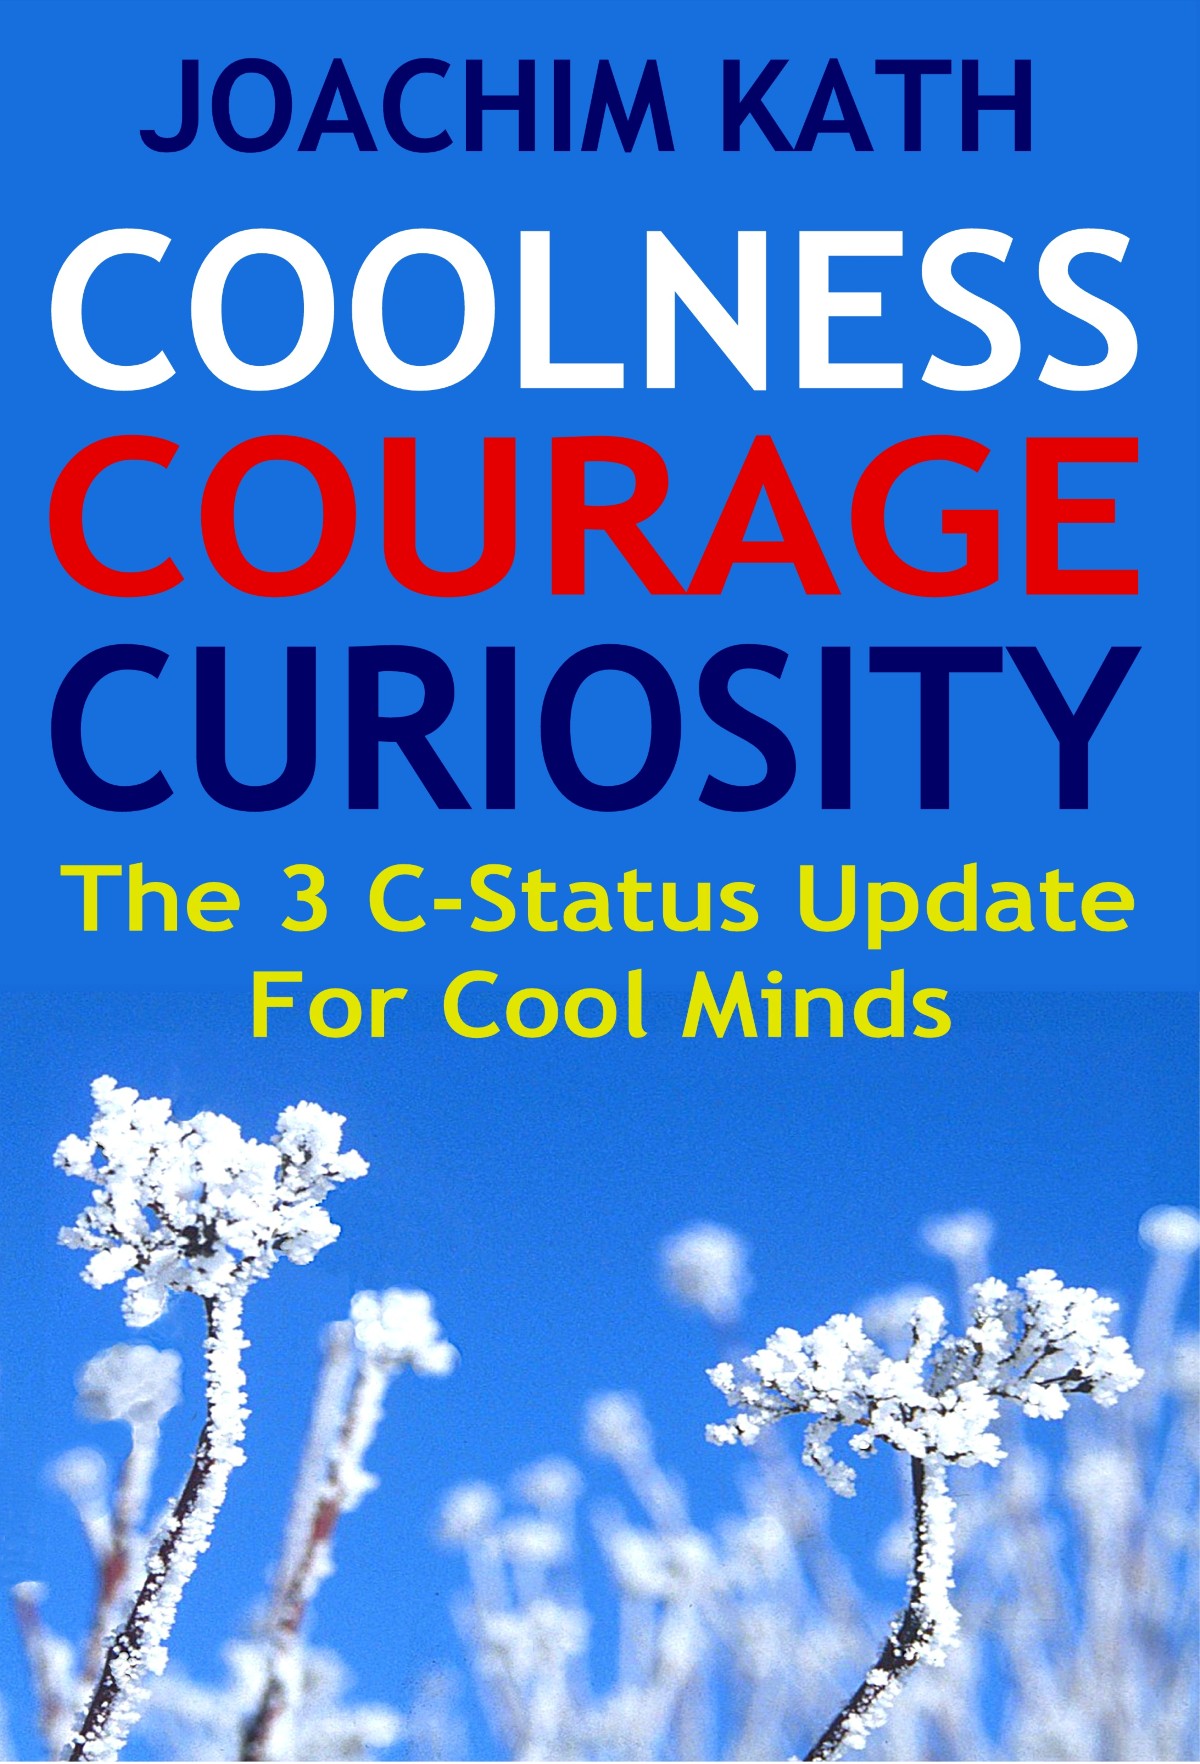 Coolness Courage Curiosity